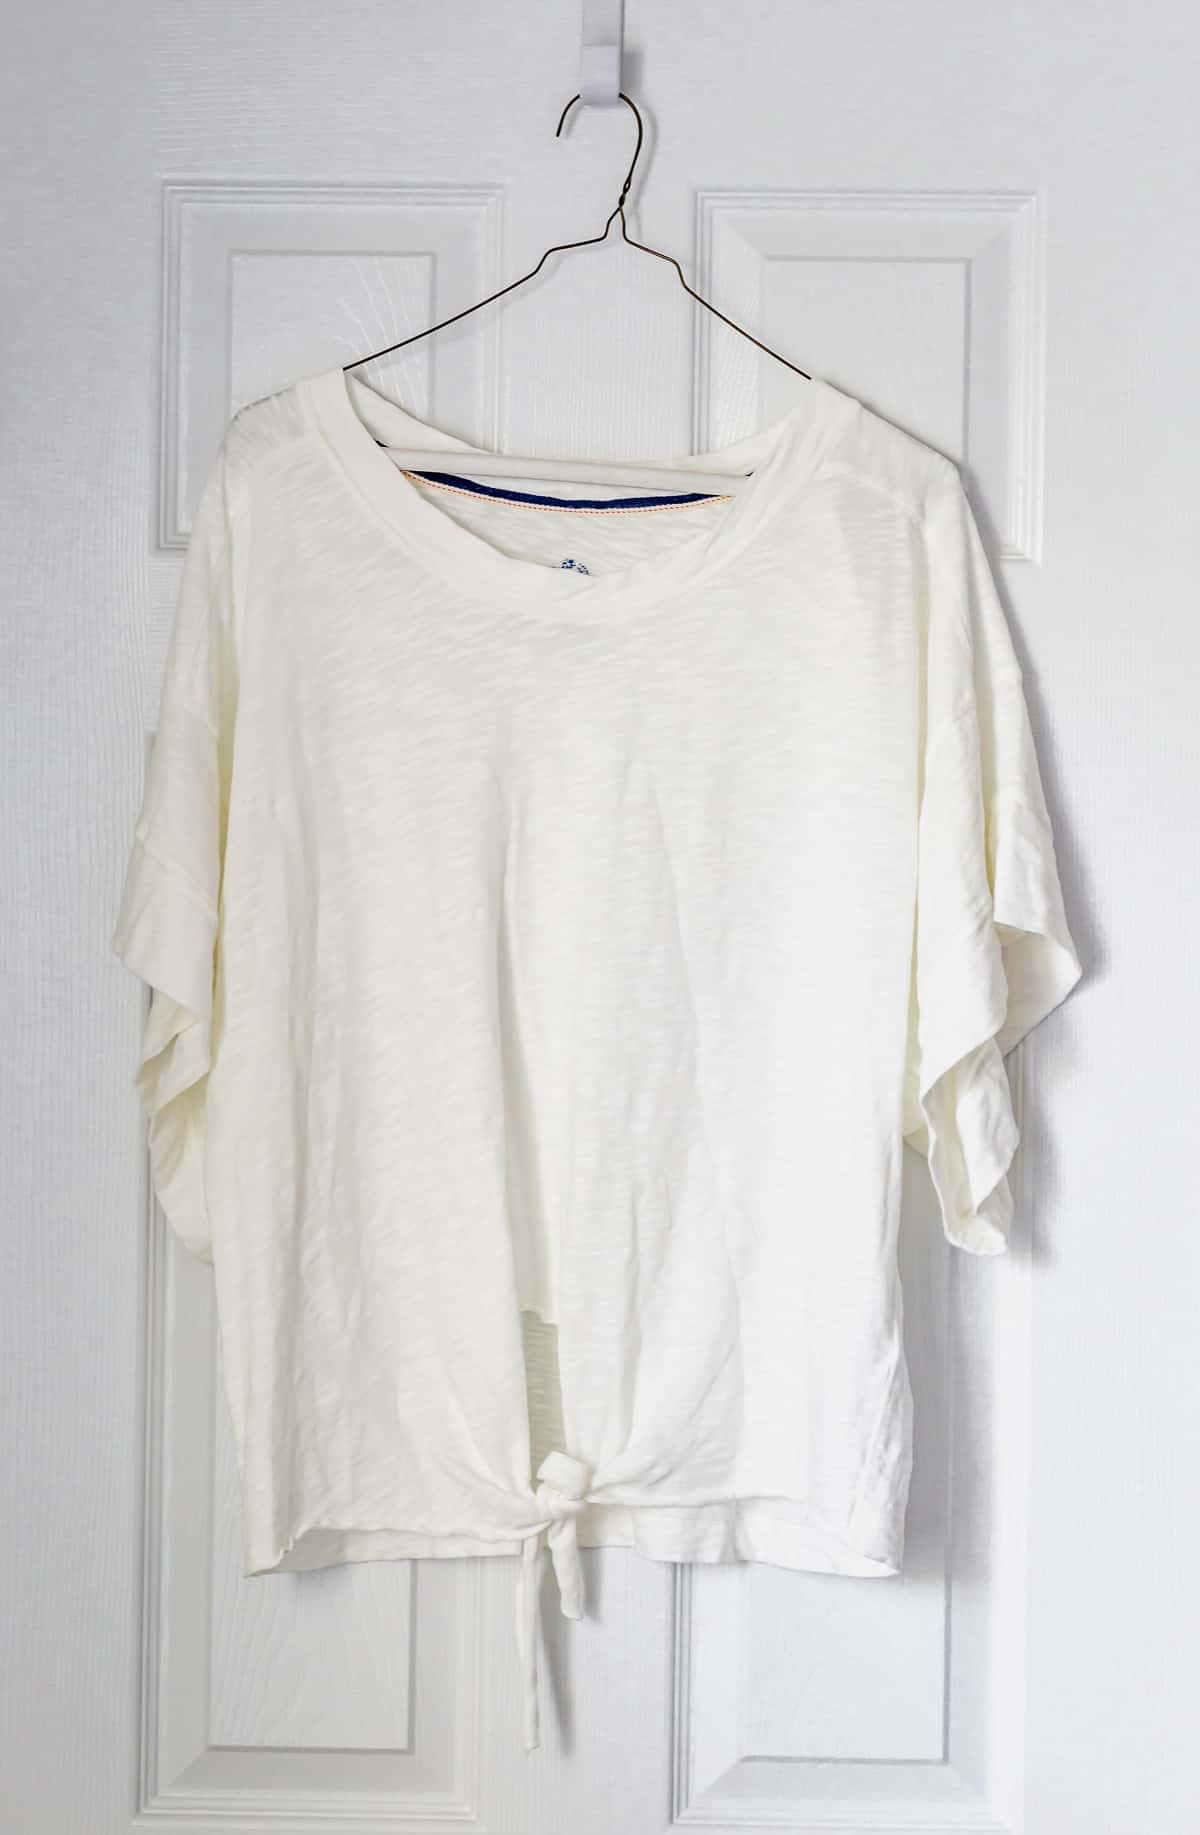 Pilcro shelley washed top in ivory on a hanger